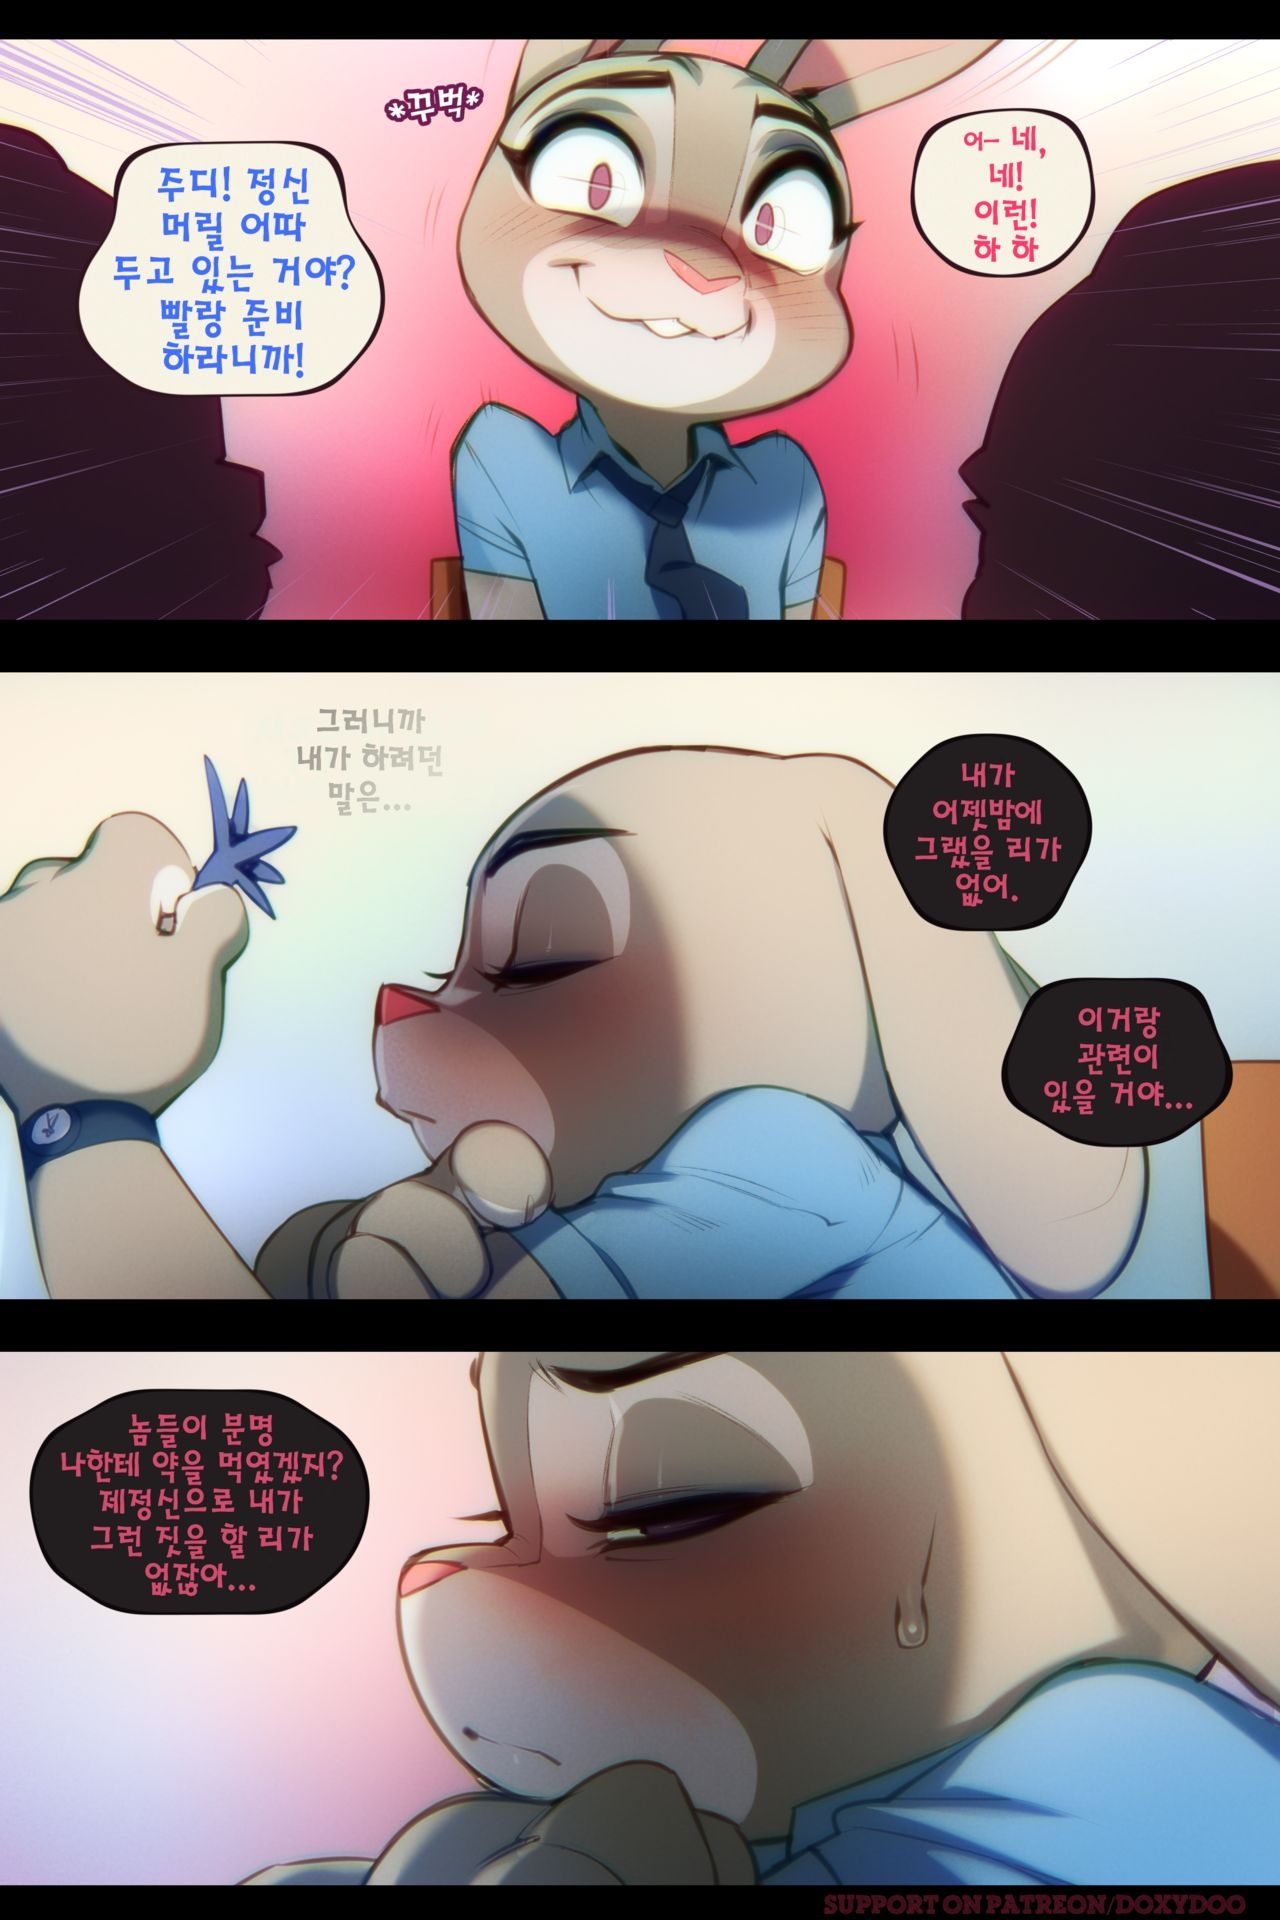 [Doxy] Sweet Sting Part 2: Down The Rabbit Hole | 달콤한 함정수사 2부: 토끼 굴속으로 (Zootopia) [Korean] [Ongoing] 4